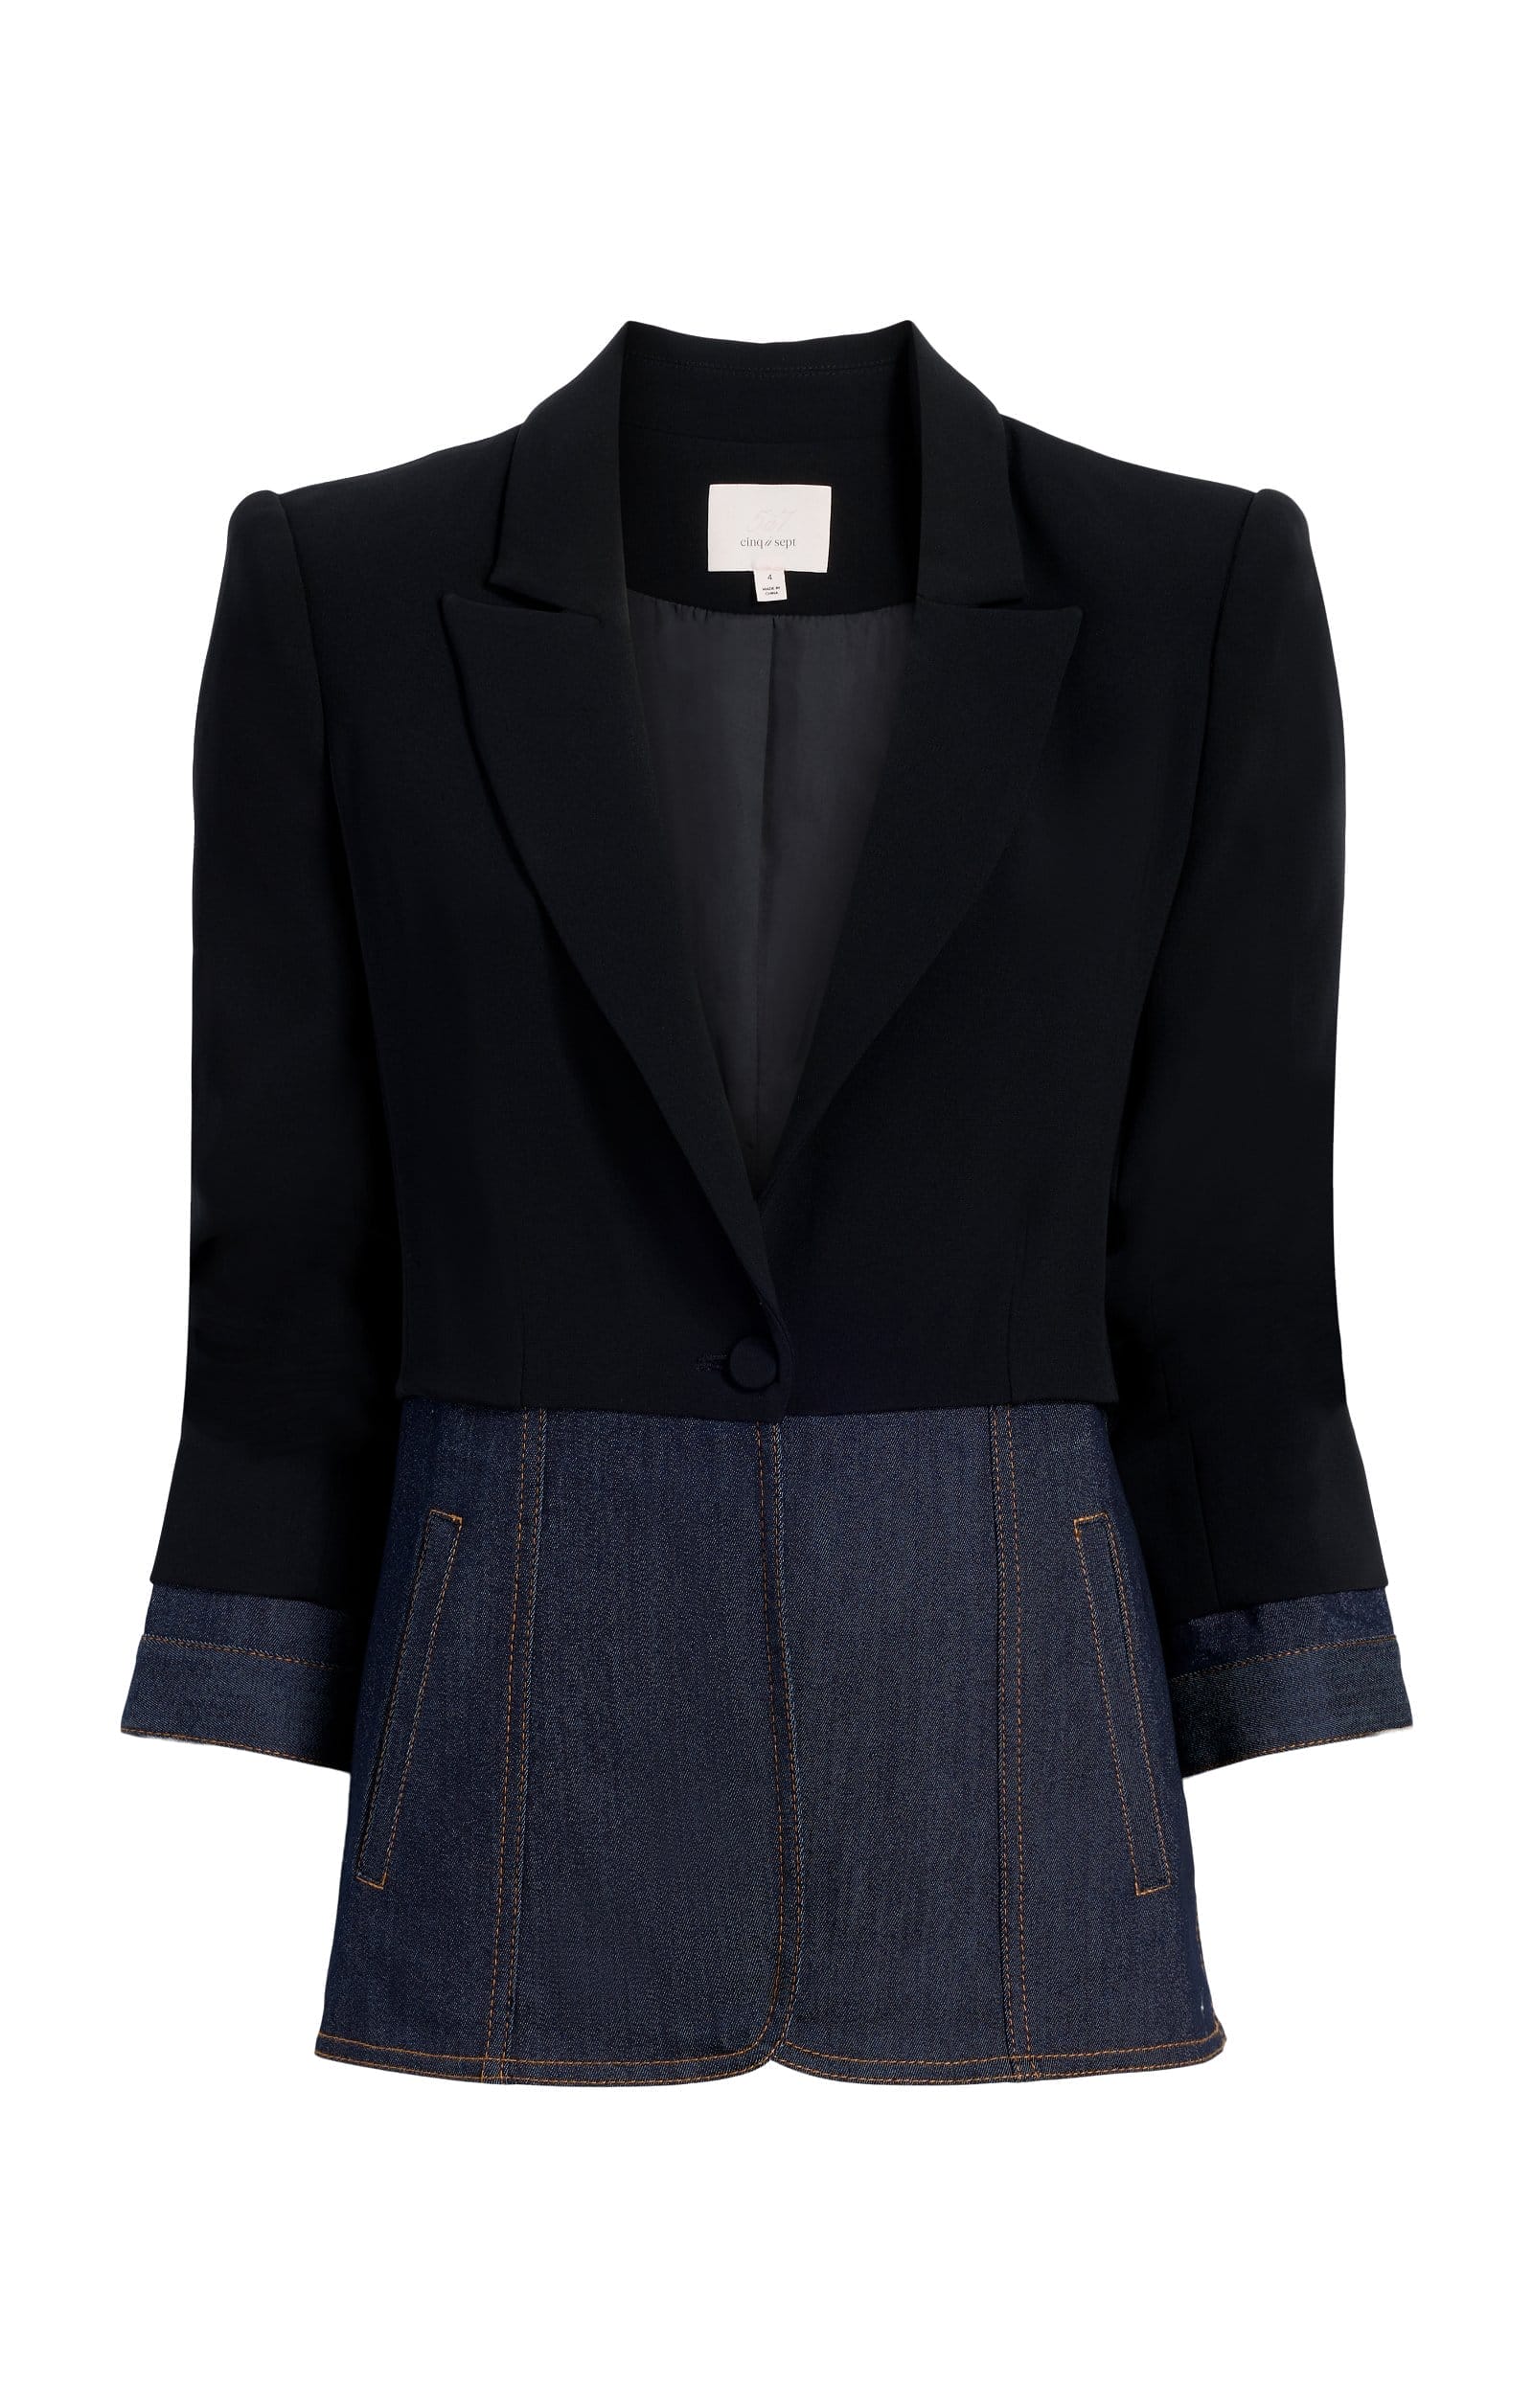 https://cinqasept.nyc/collections/le-denim/products/dionne-blazer-in-black-indigo